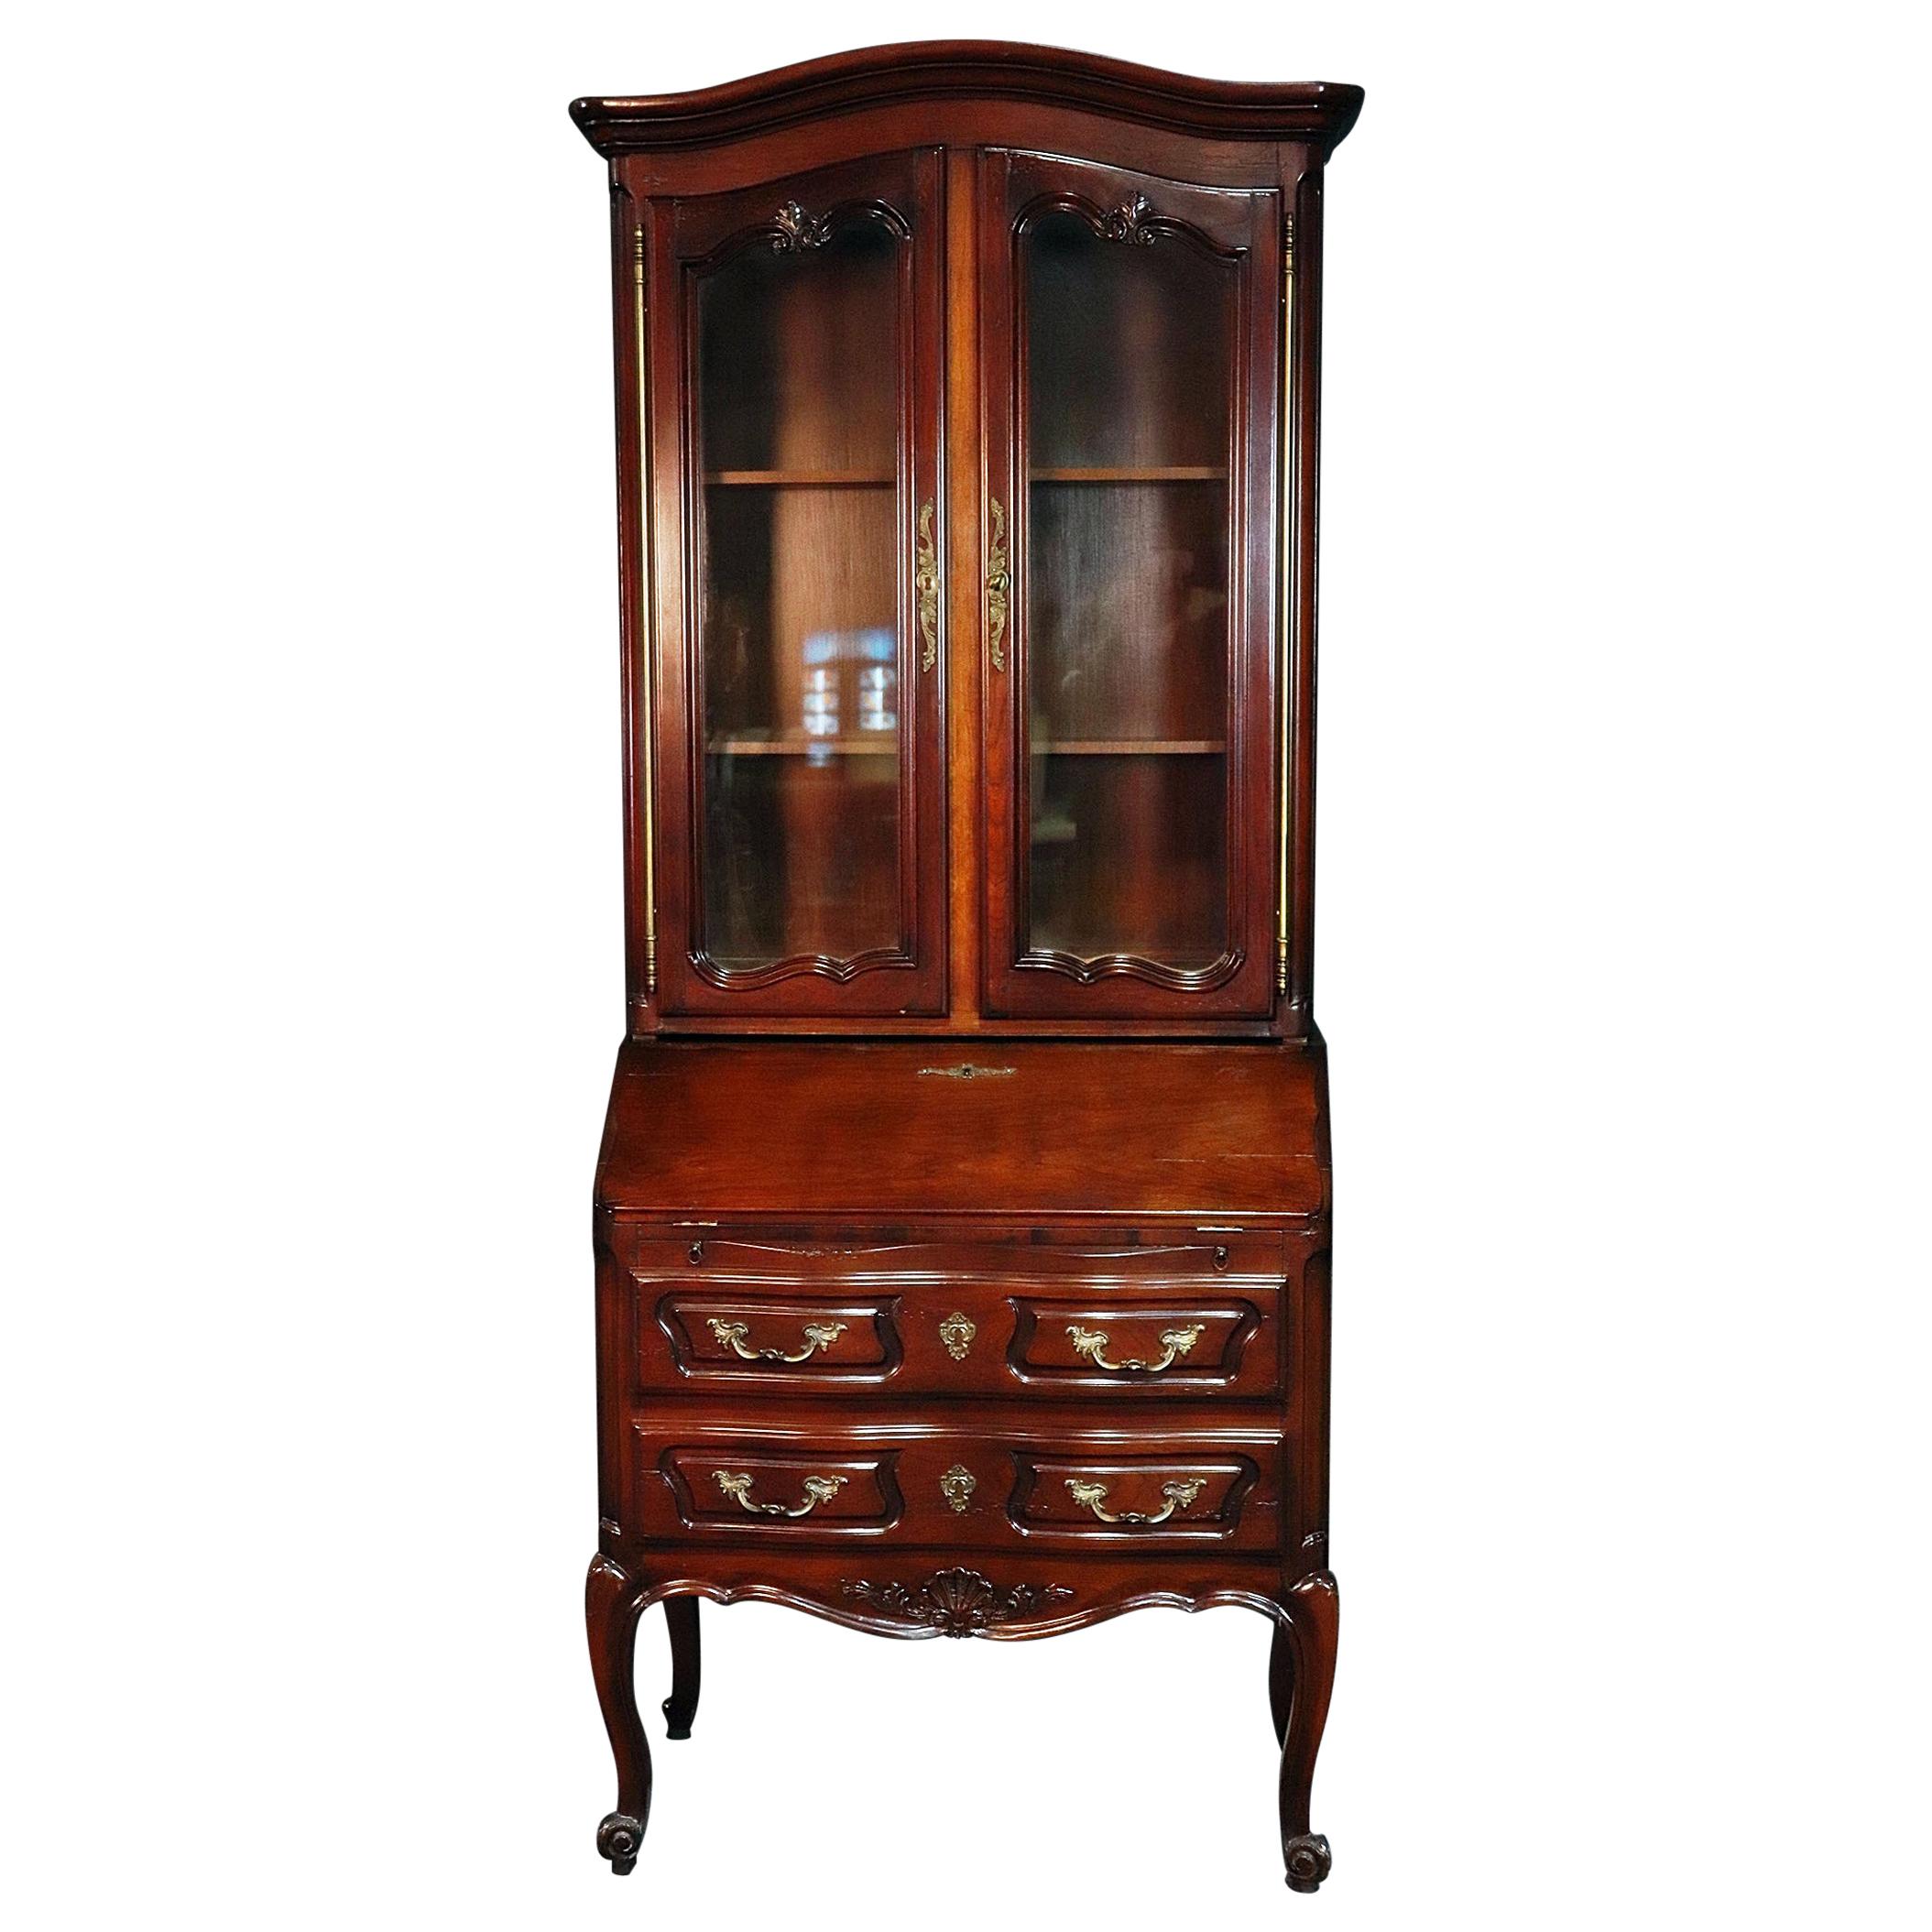 Aufrray style French Louis XV Style Walnut Secretary Desk with Bookcase Top